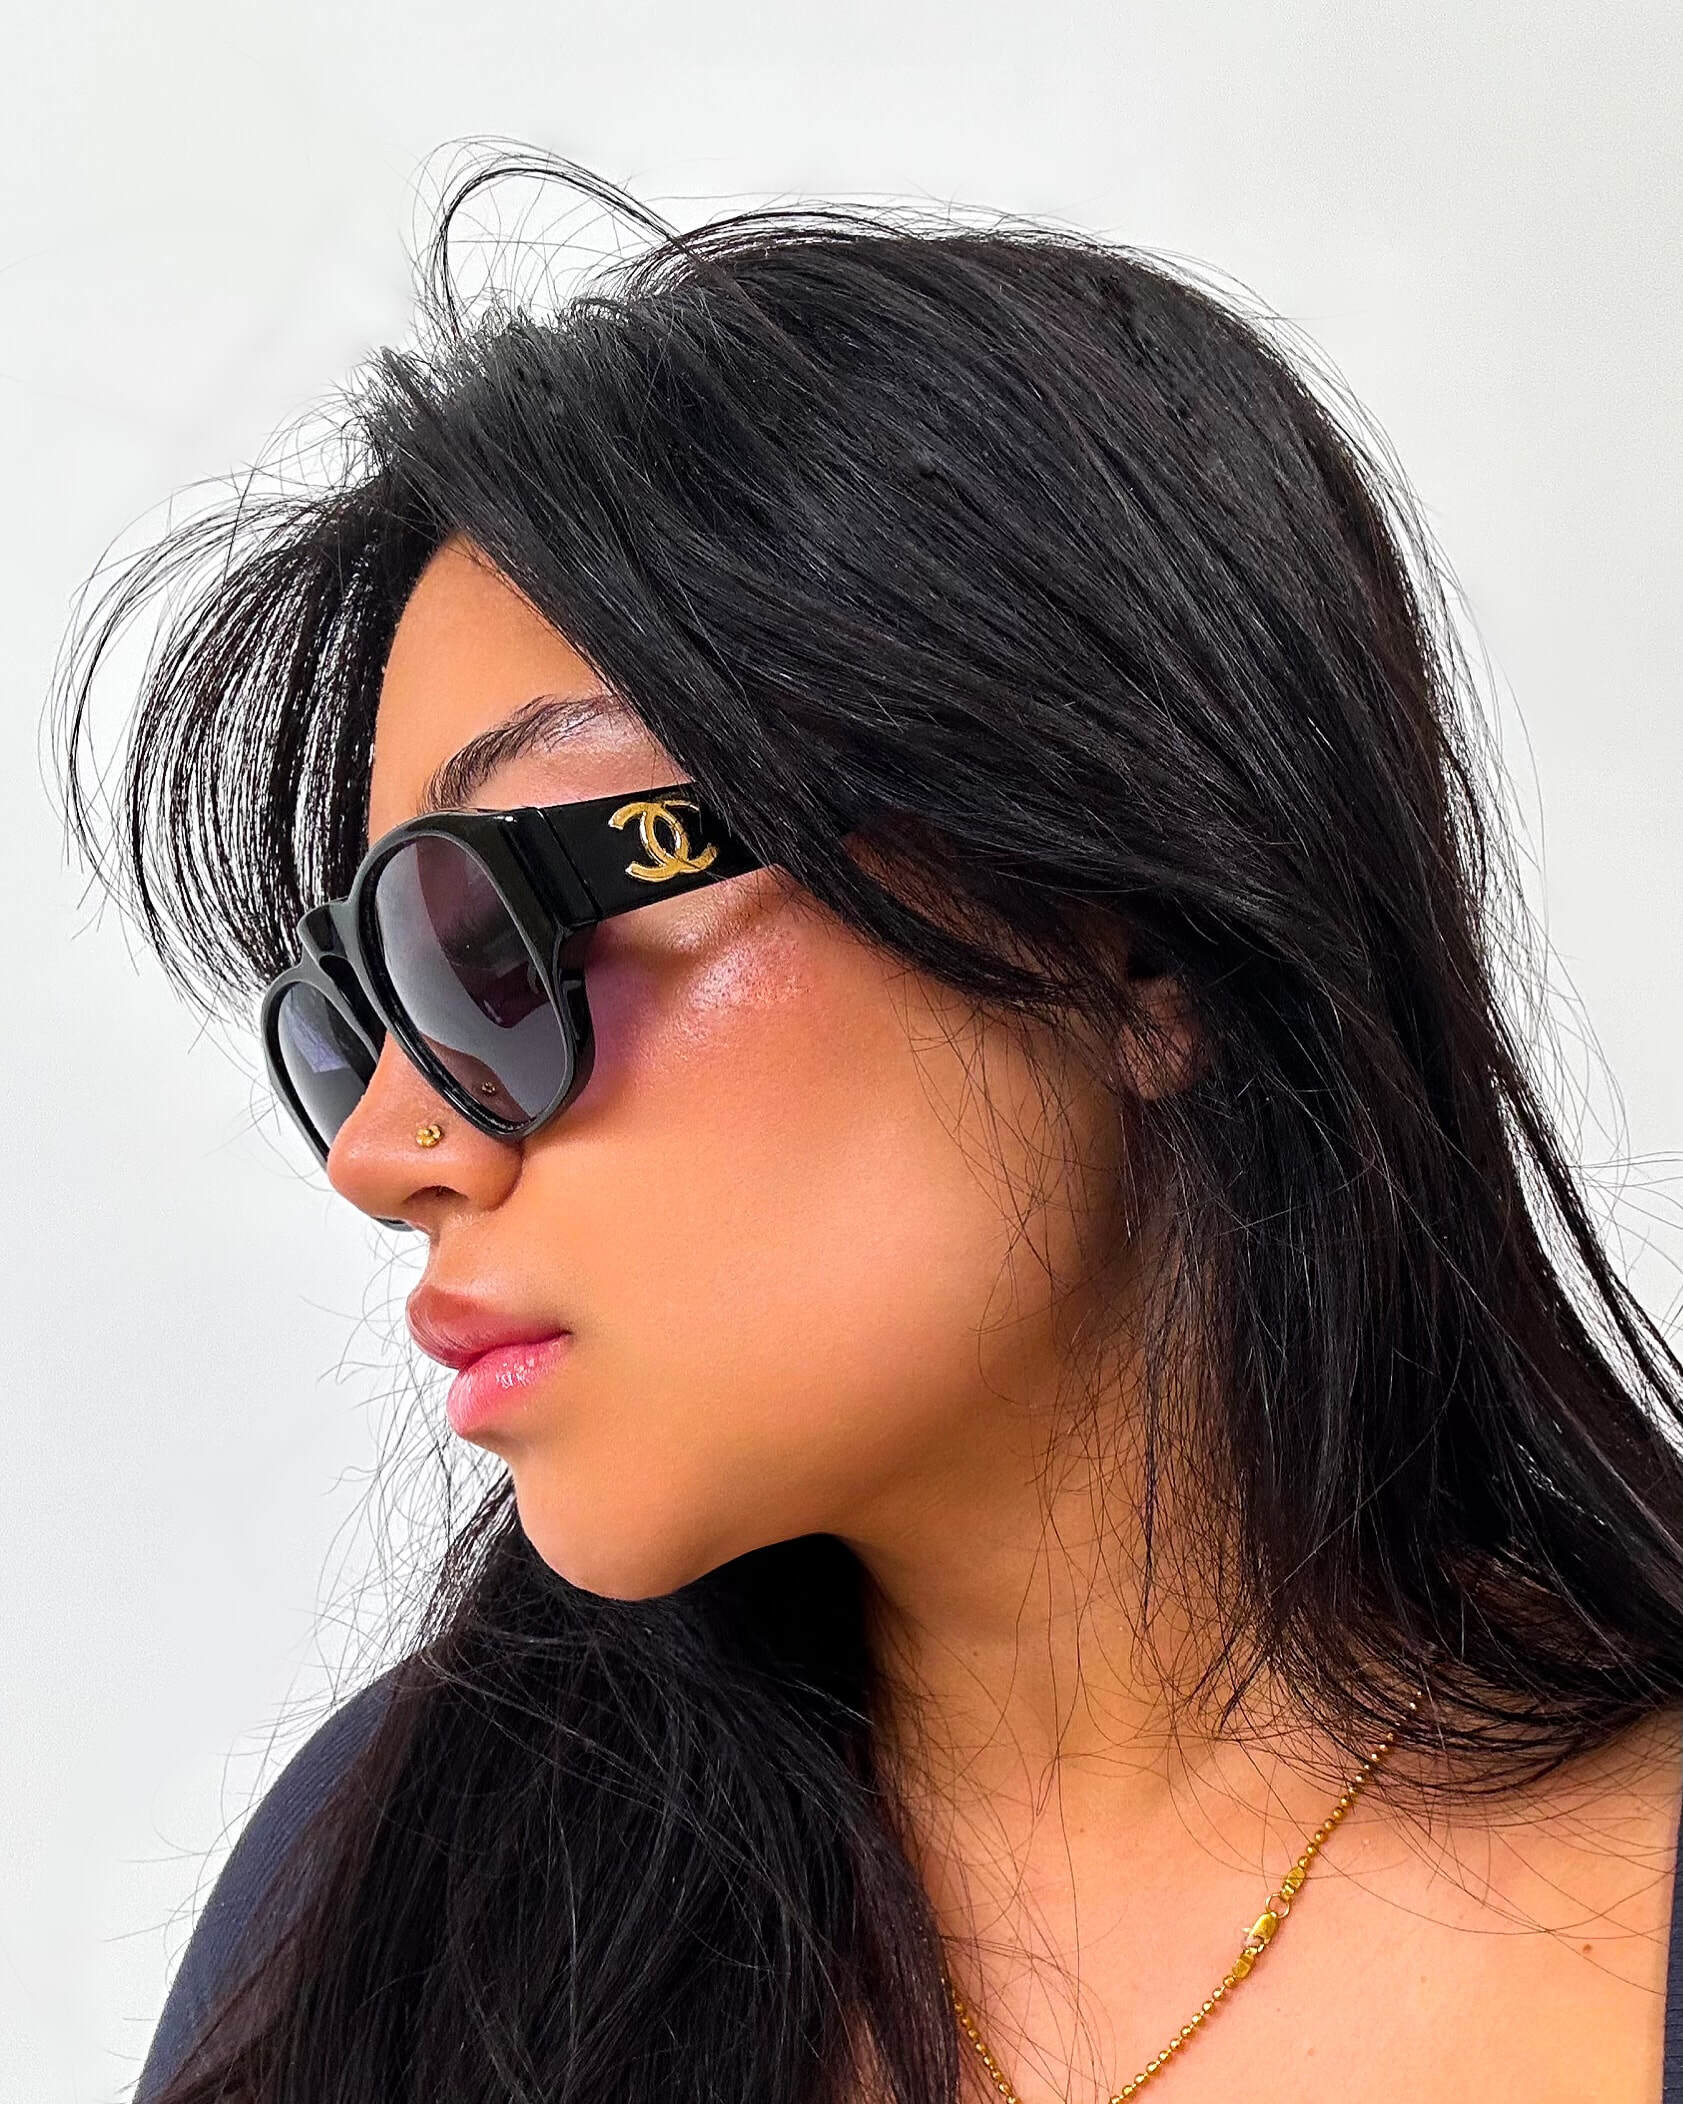 Chanel Sunglasses 01452 91235 – Vision Gallerie